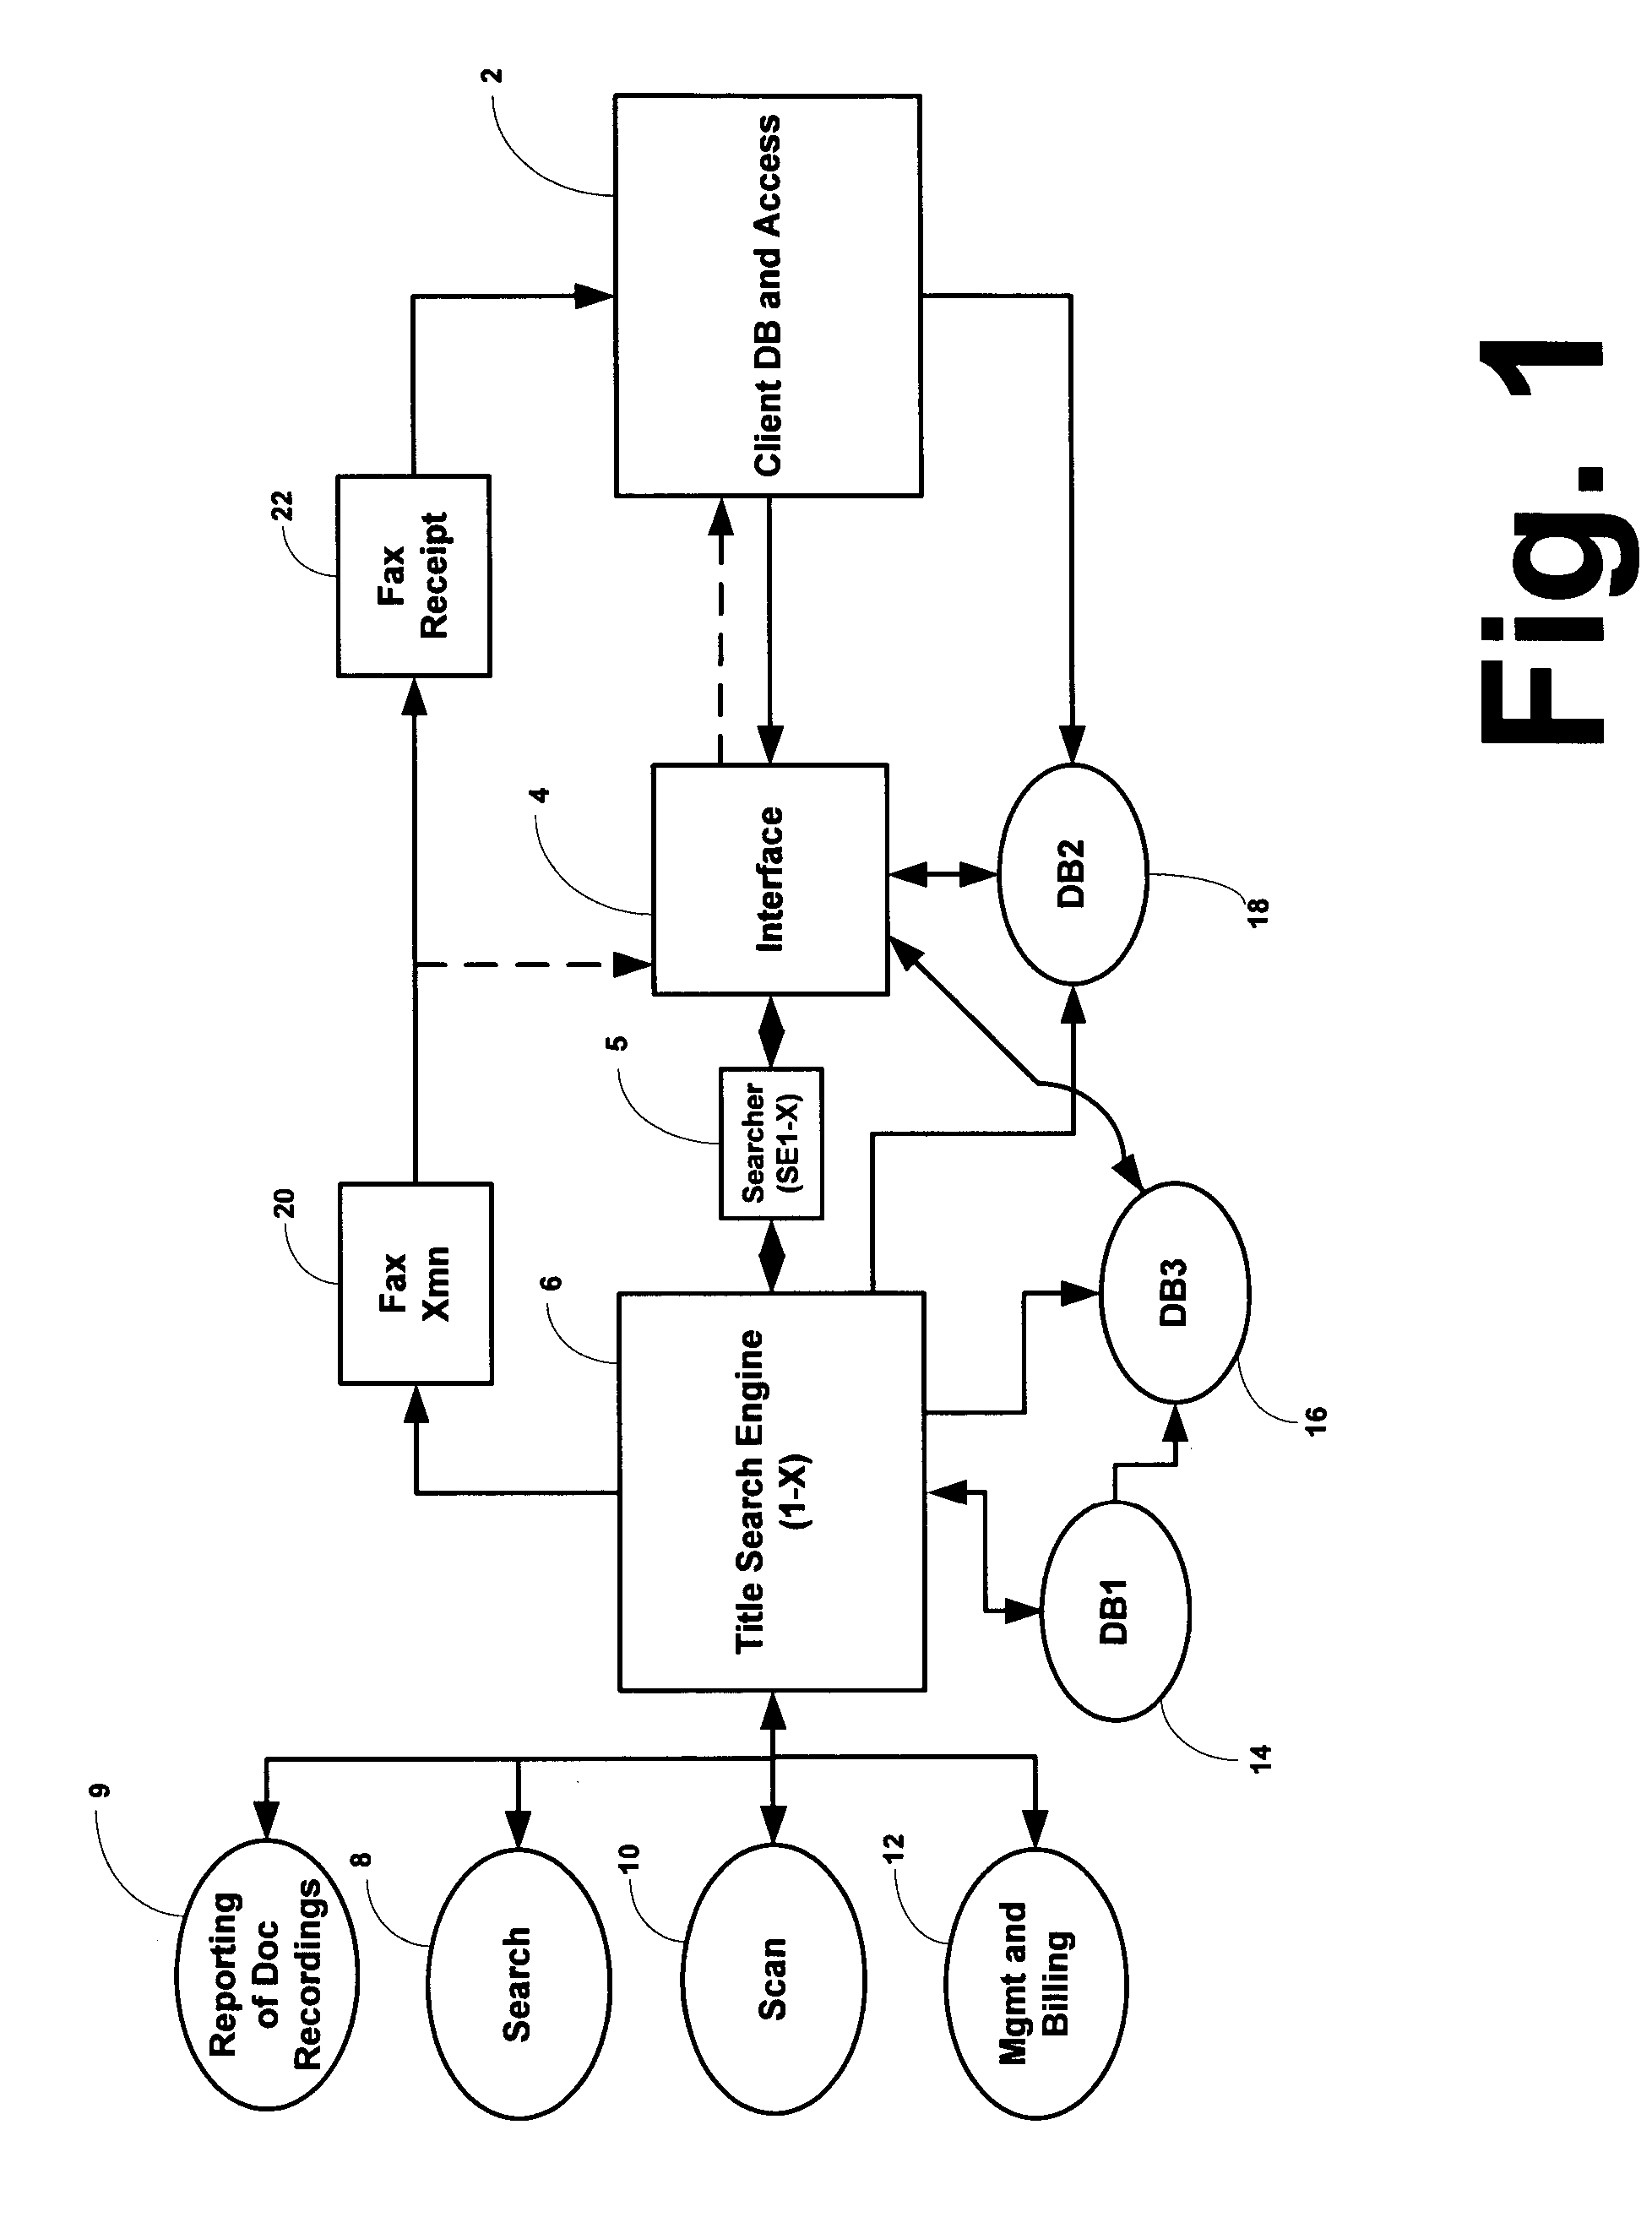 System and method for automated title searching and reporting, reporting of document recordation, and billing